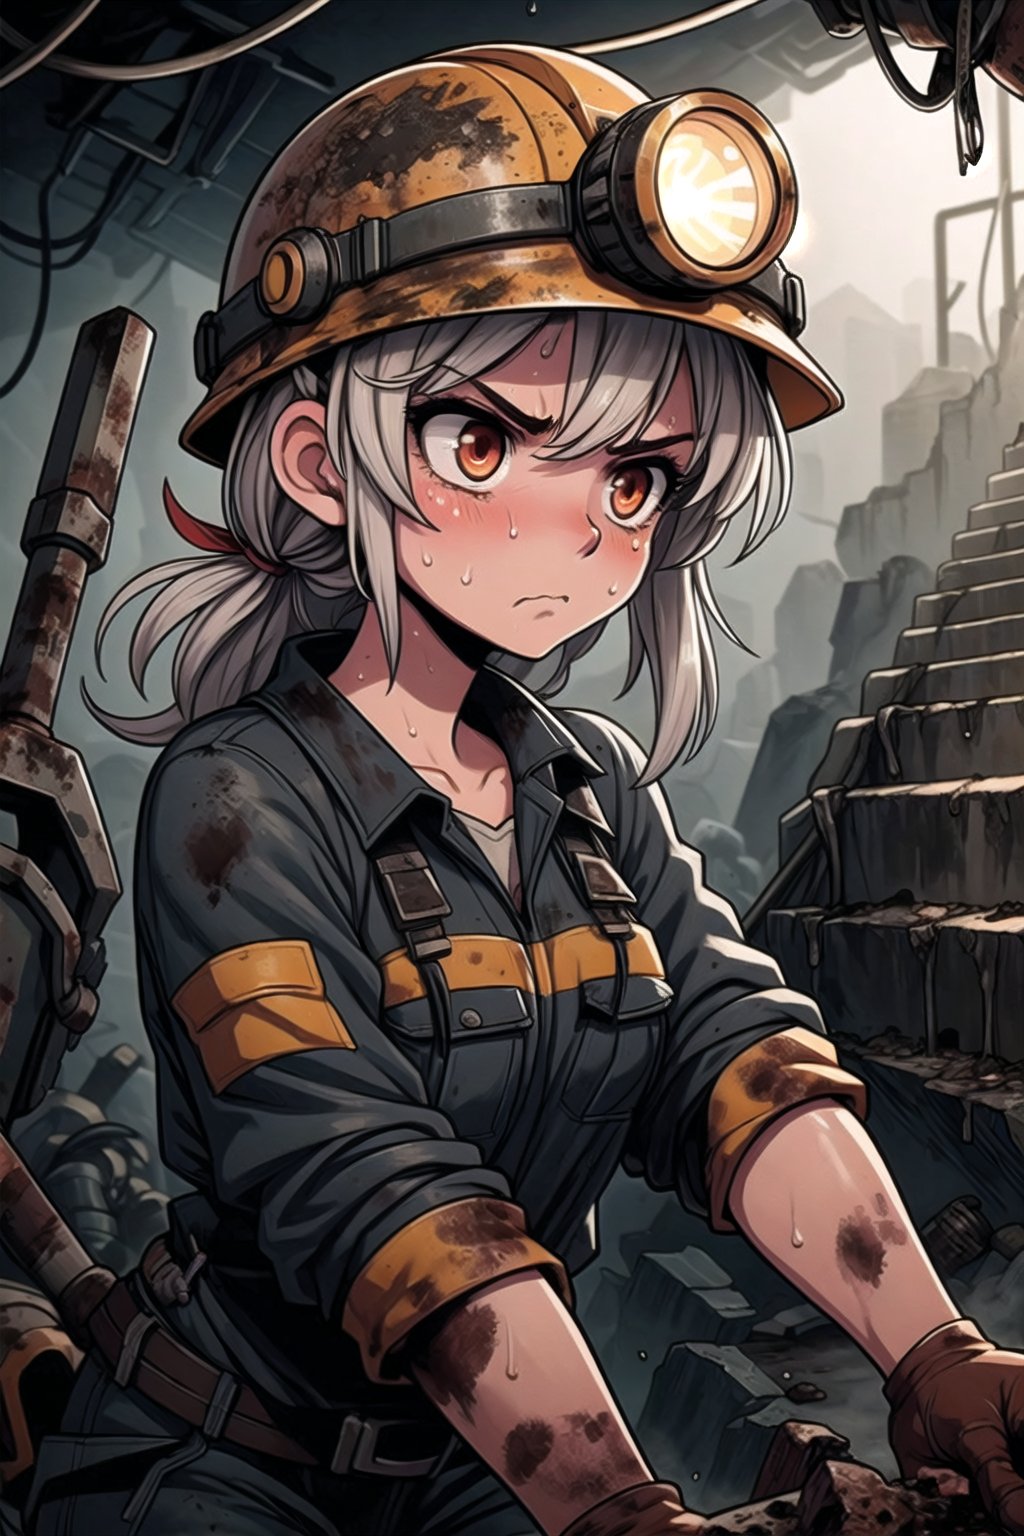 girl, angry,close up, miner, shovel, rugged attire, worn-out clothing, dusty environment, underground tunnels, dim lighting, sweat and dirt, determined expression, mining equipment, gritty atmosphere, hardworking demeanor, industrial setting, unkempt hair, sleeves rolled up.,MiNr,helmet,